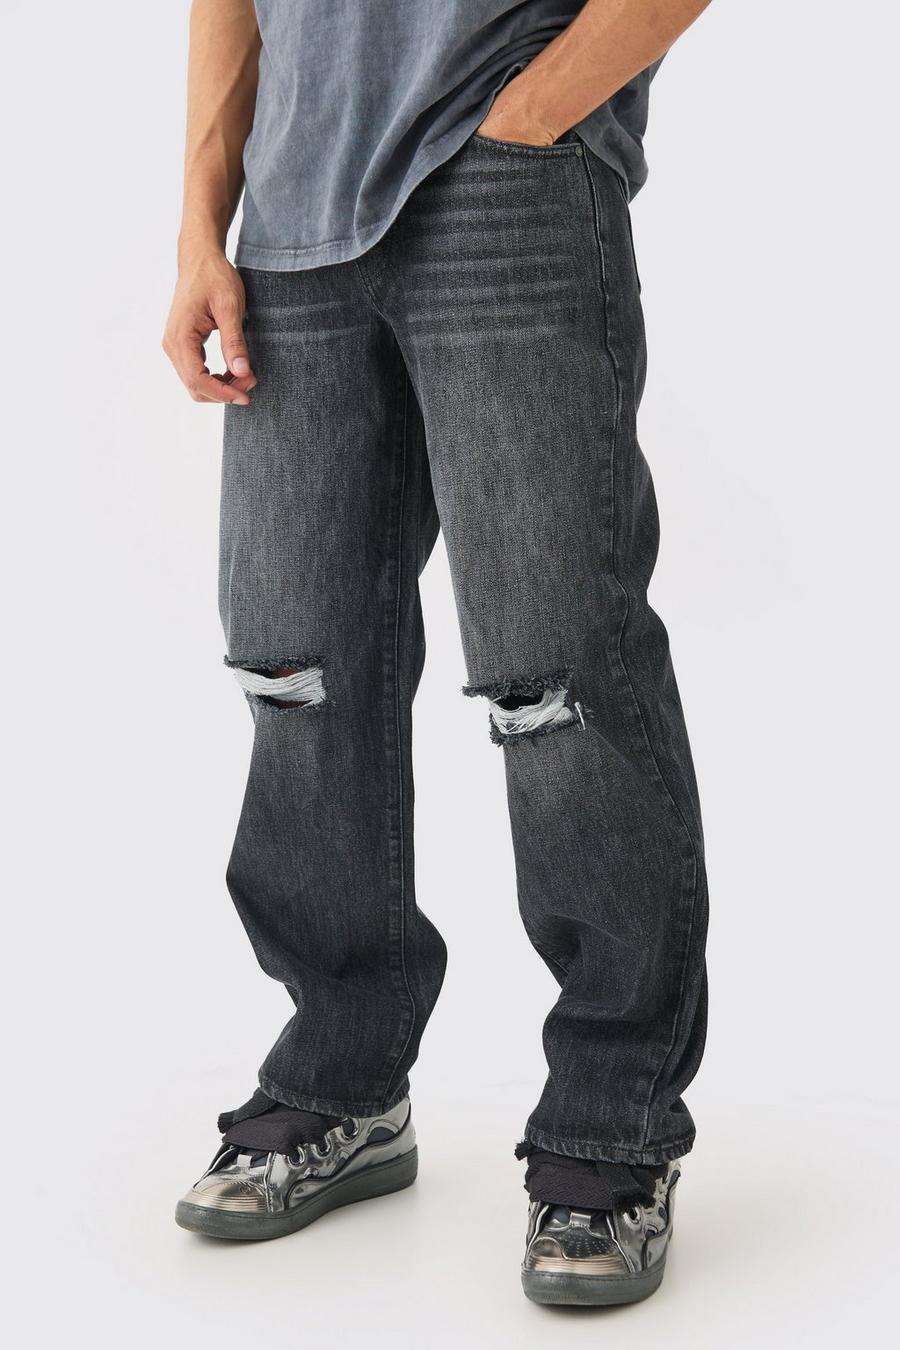 Baggy Rigid Black Wash Ripped Knee Jeans